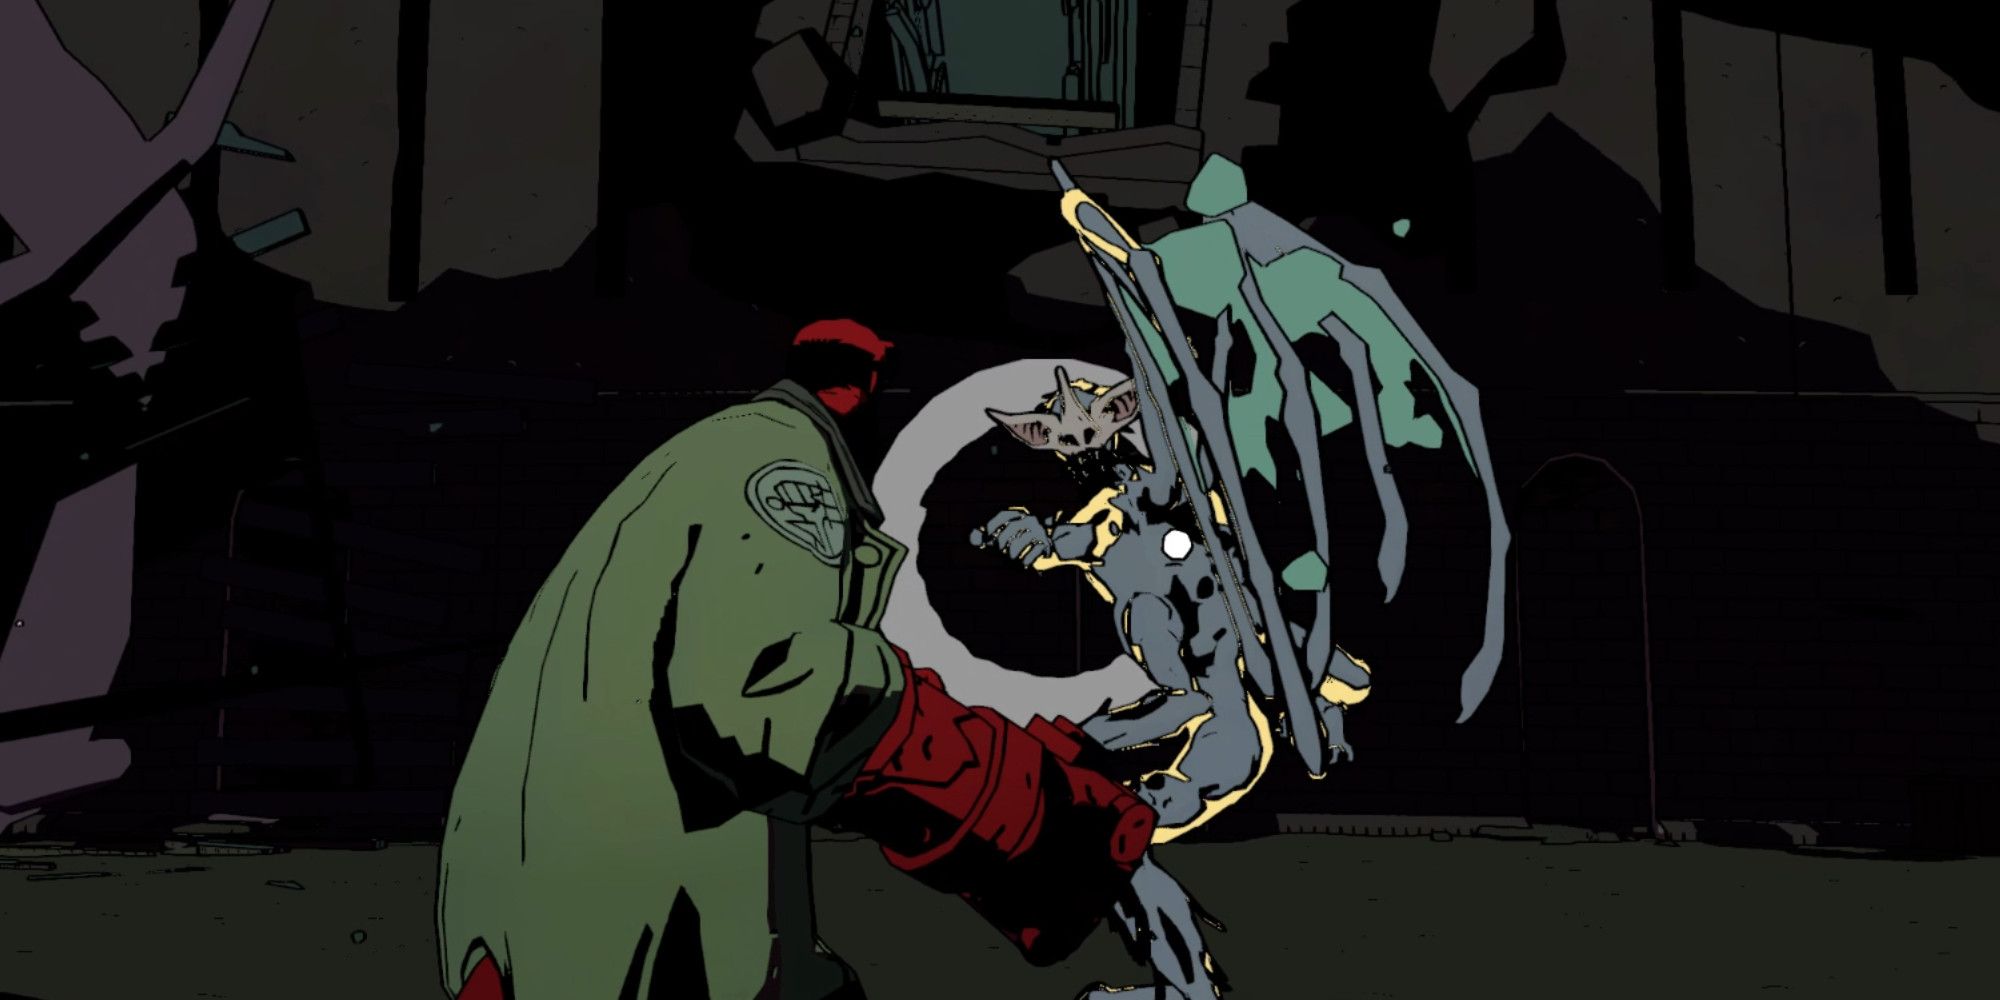 Hellboy prepares for punch from bat